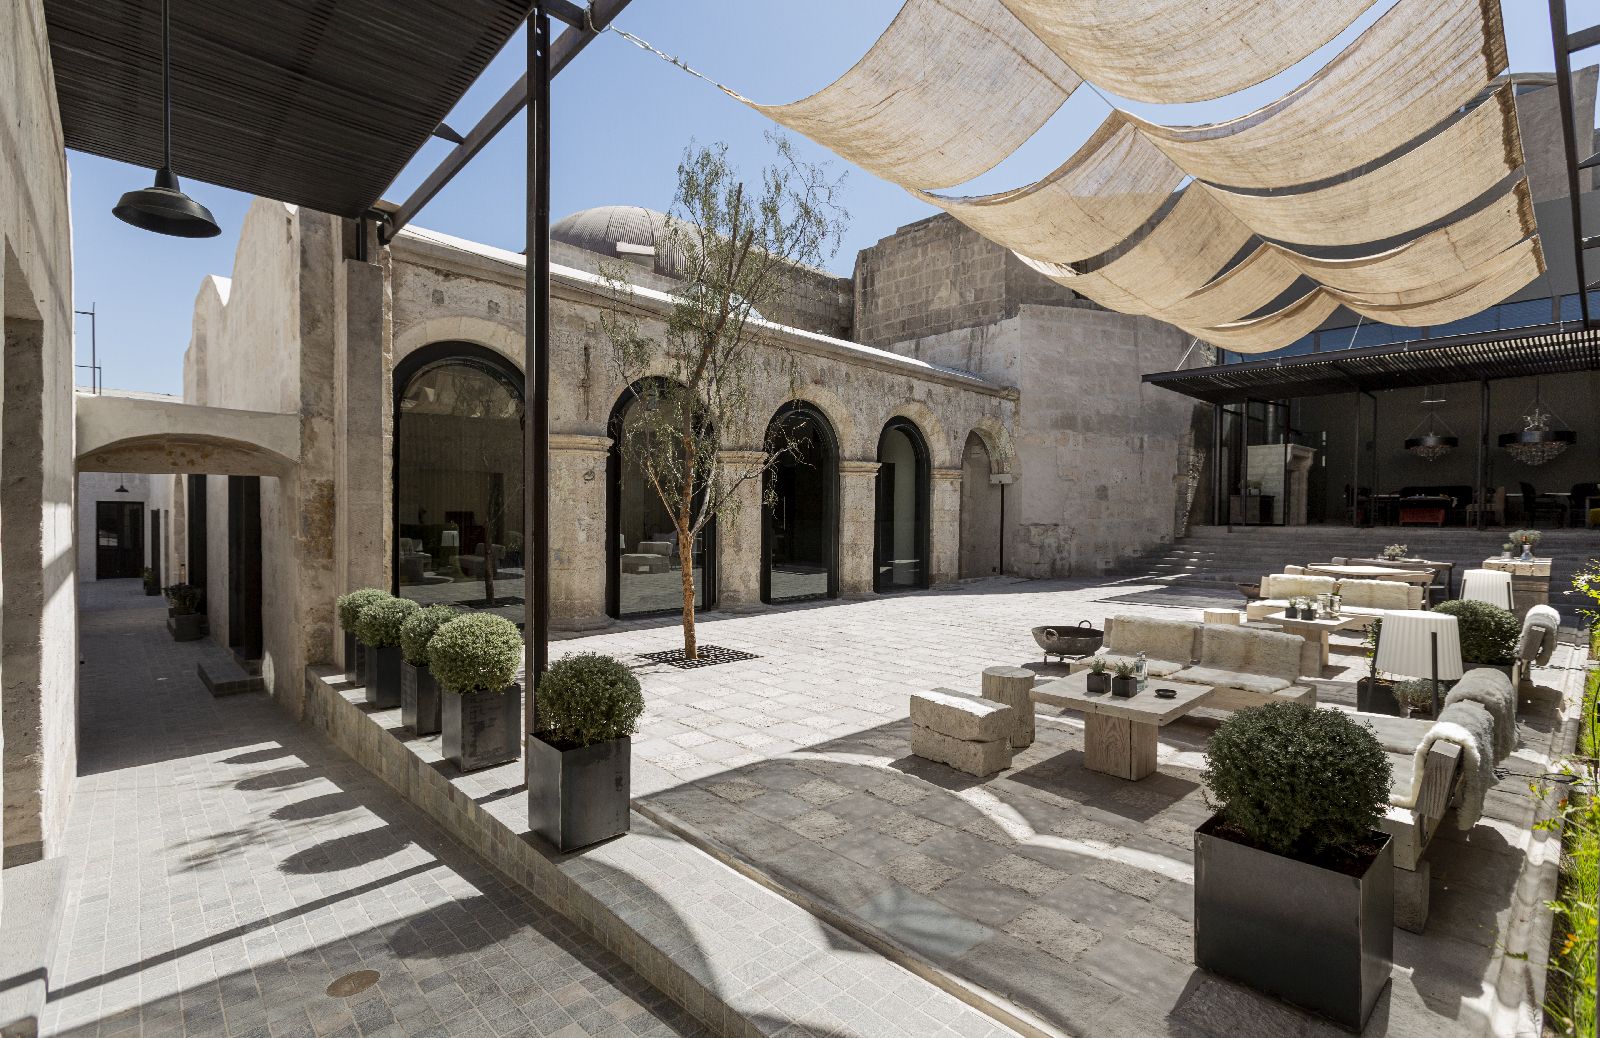 Courtyard with outdoor seating at Cirqa hotel in Arequipa Peru